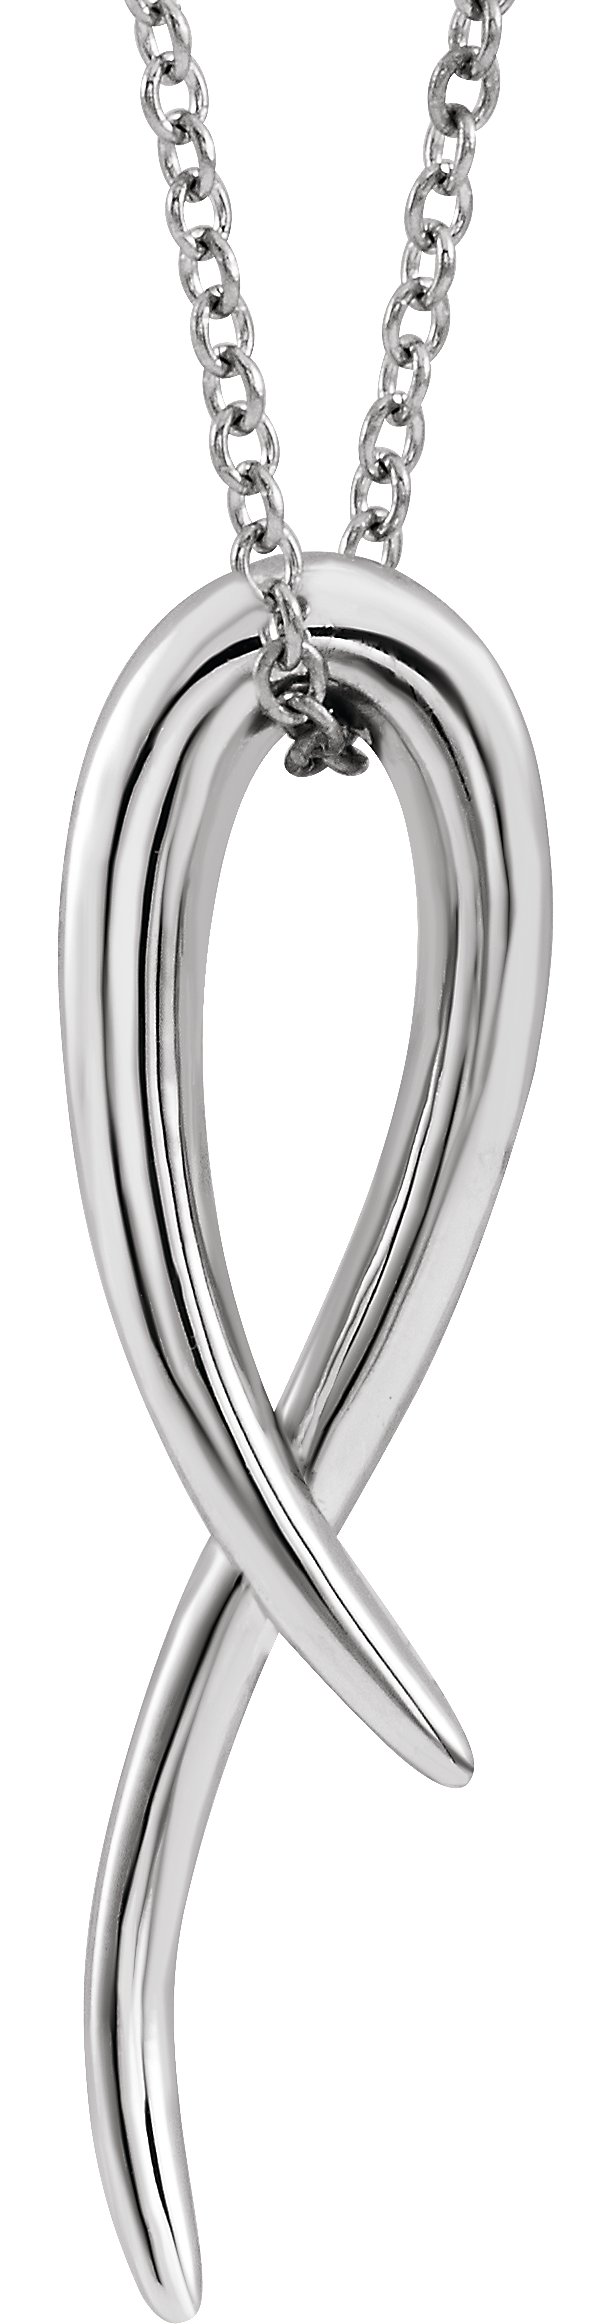 Sterling Silver Freeform 16-18" Necklace